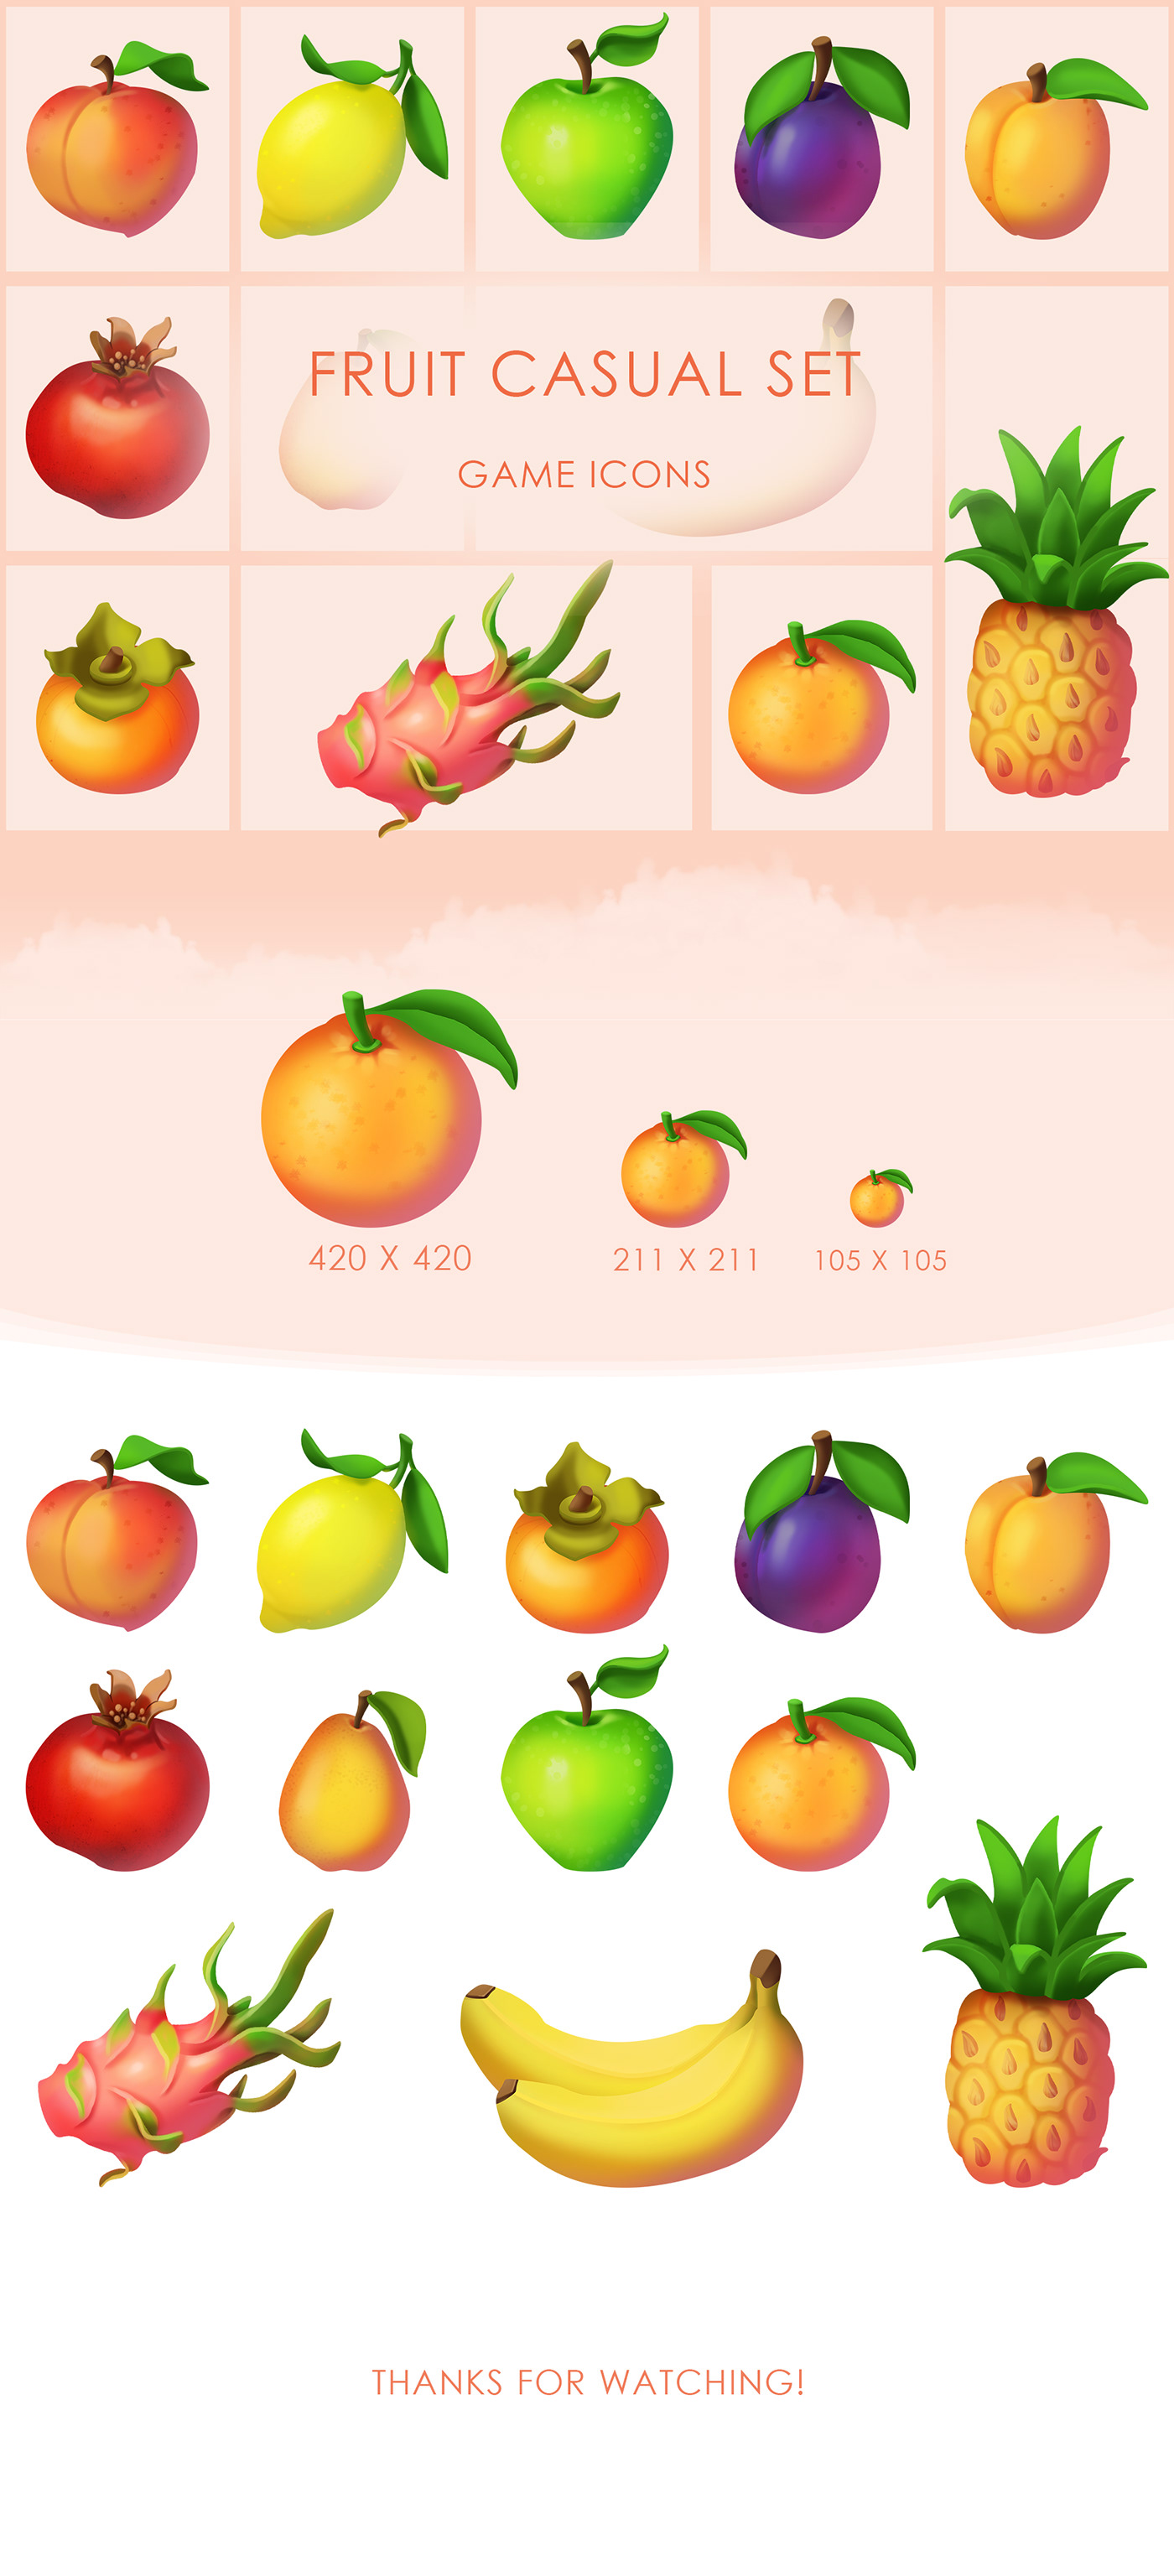 2D casual farm Fruit game gameart gamedev Icon match3 set